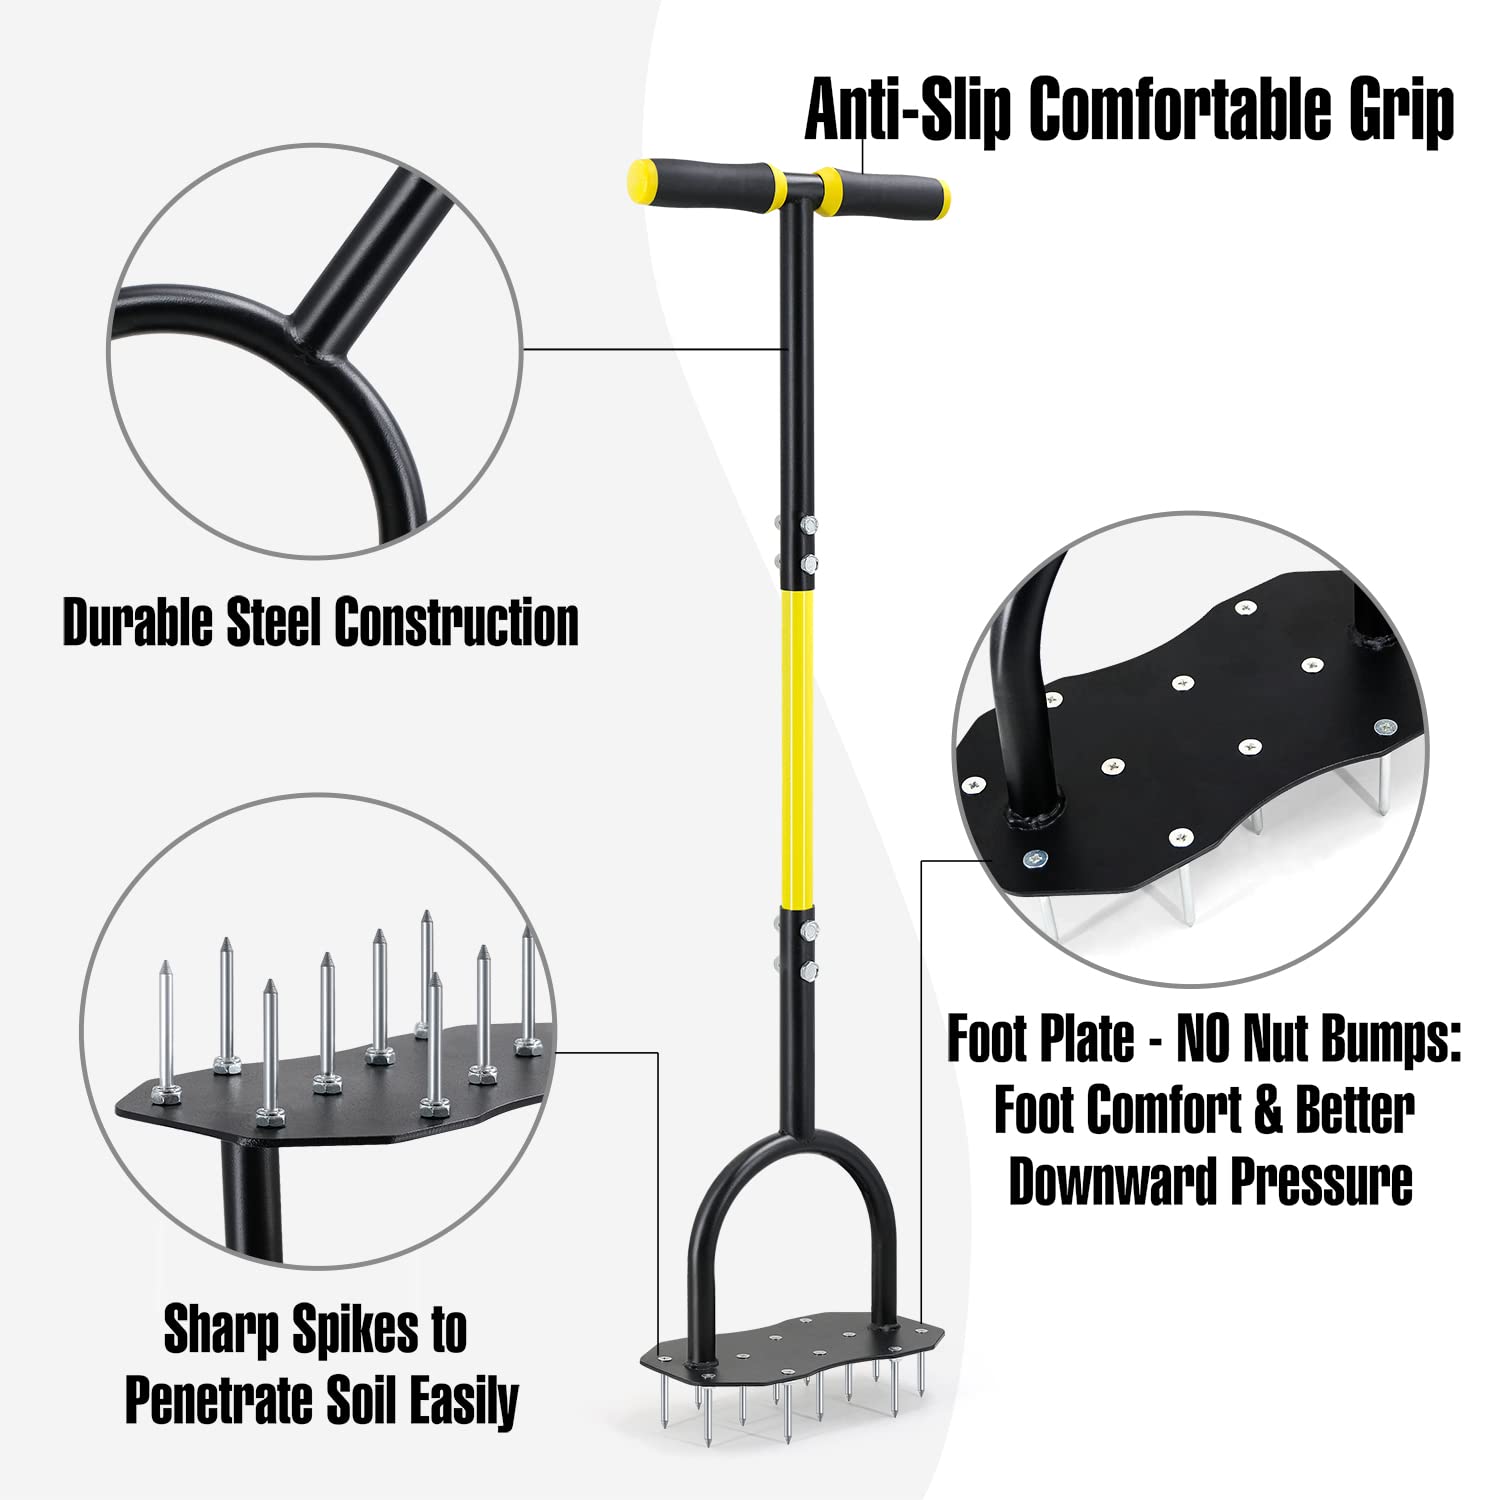 Lawn Spike Air Aerator|Manual Spike Lawn Aerator Tools For Compact Soil